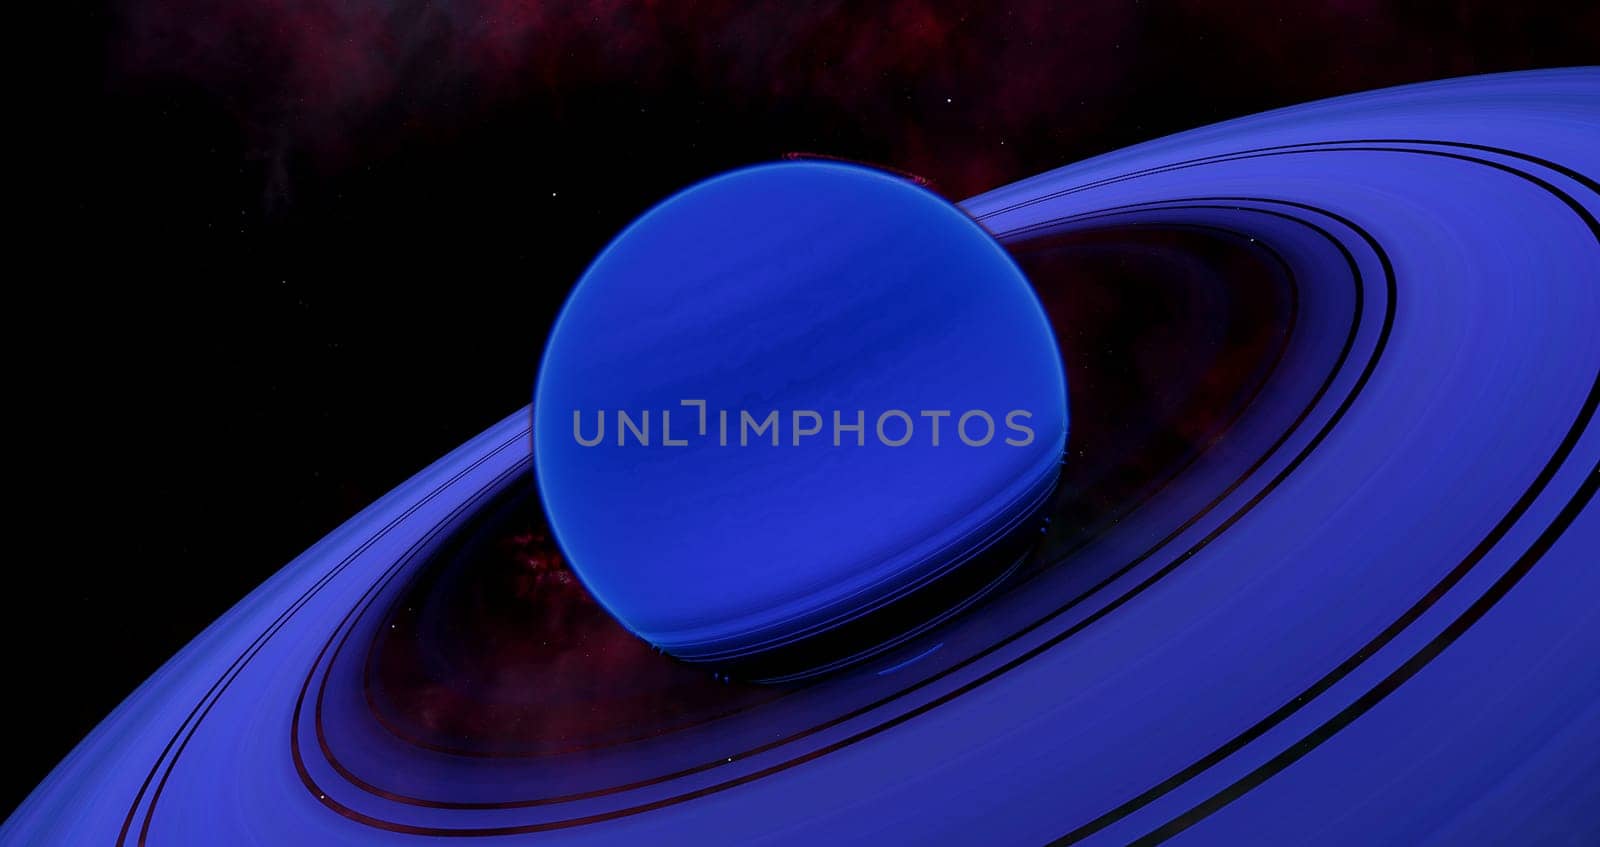 This blue warm neptune planet with a ring system is an exoplanet outside our solar system.